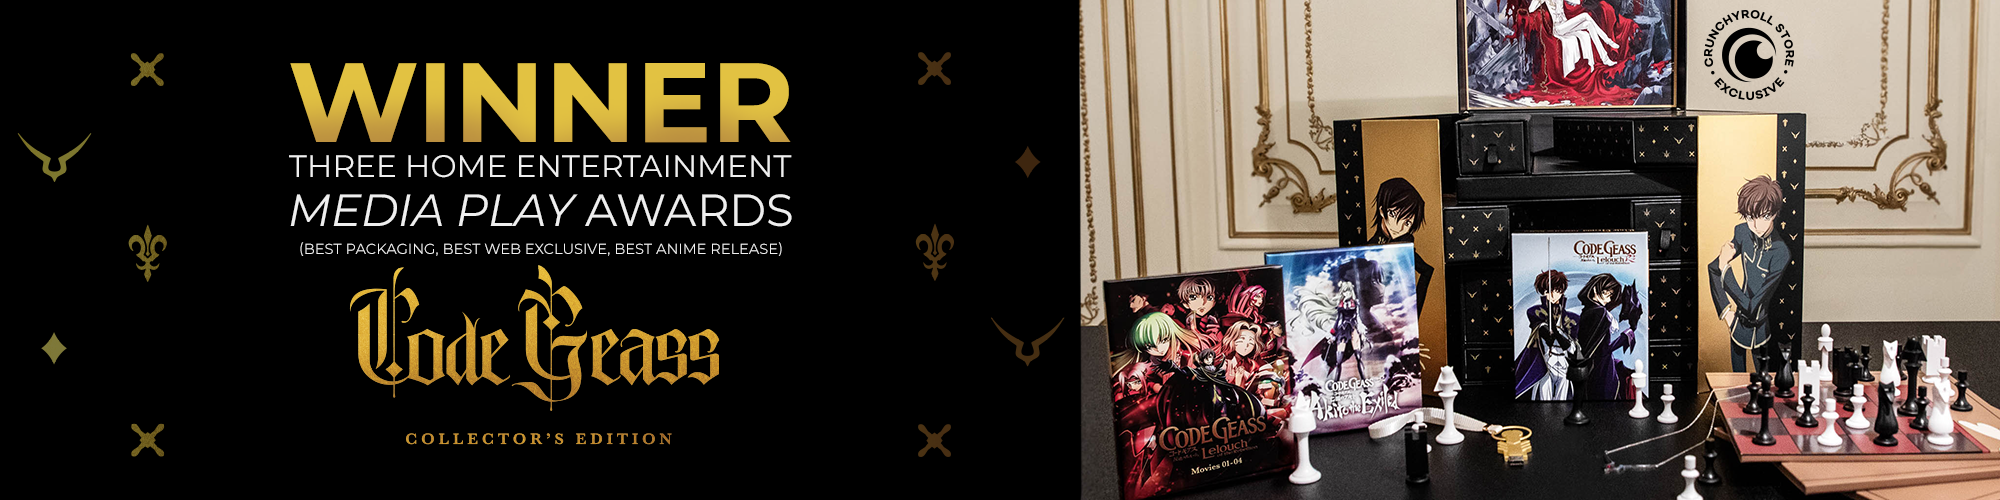  Code Geass Collector's Edition